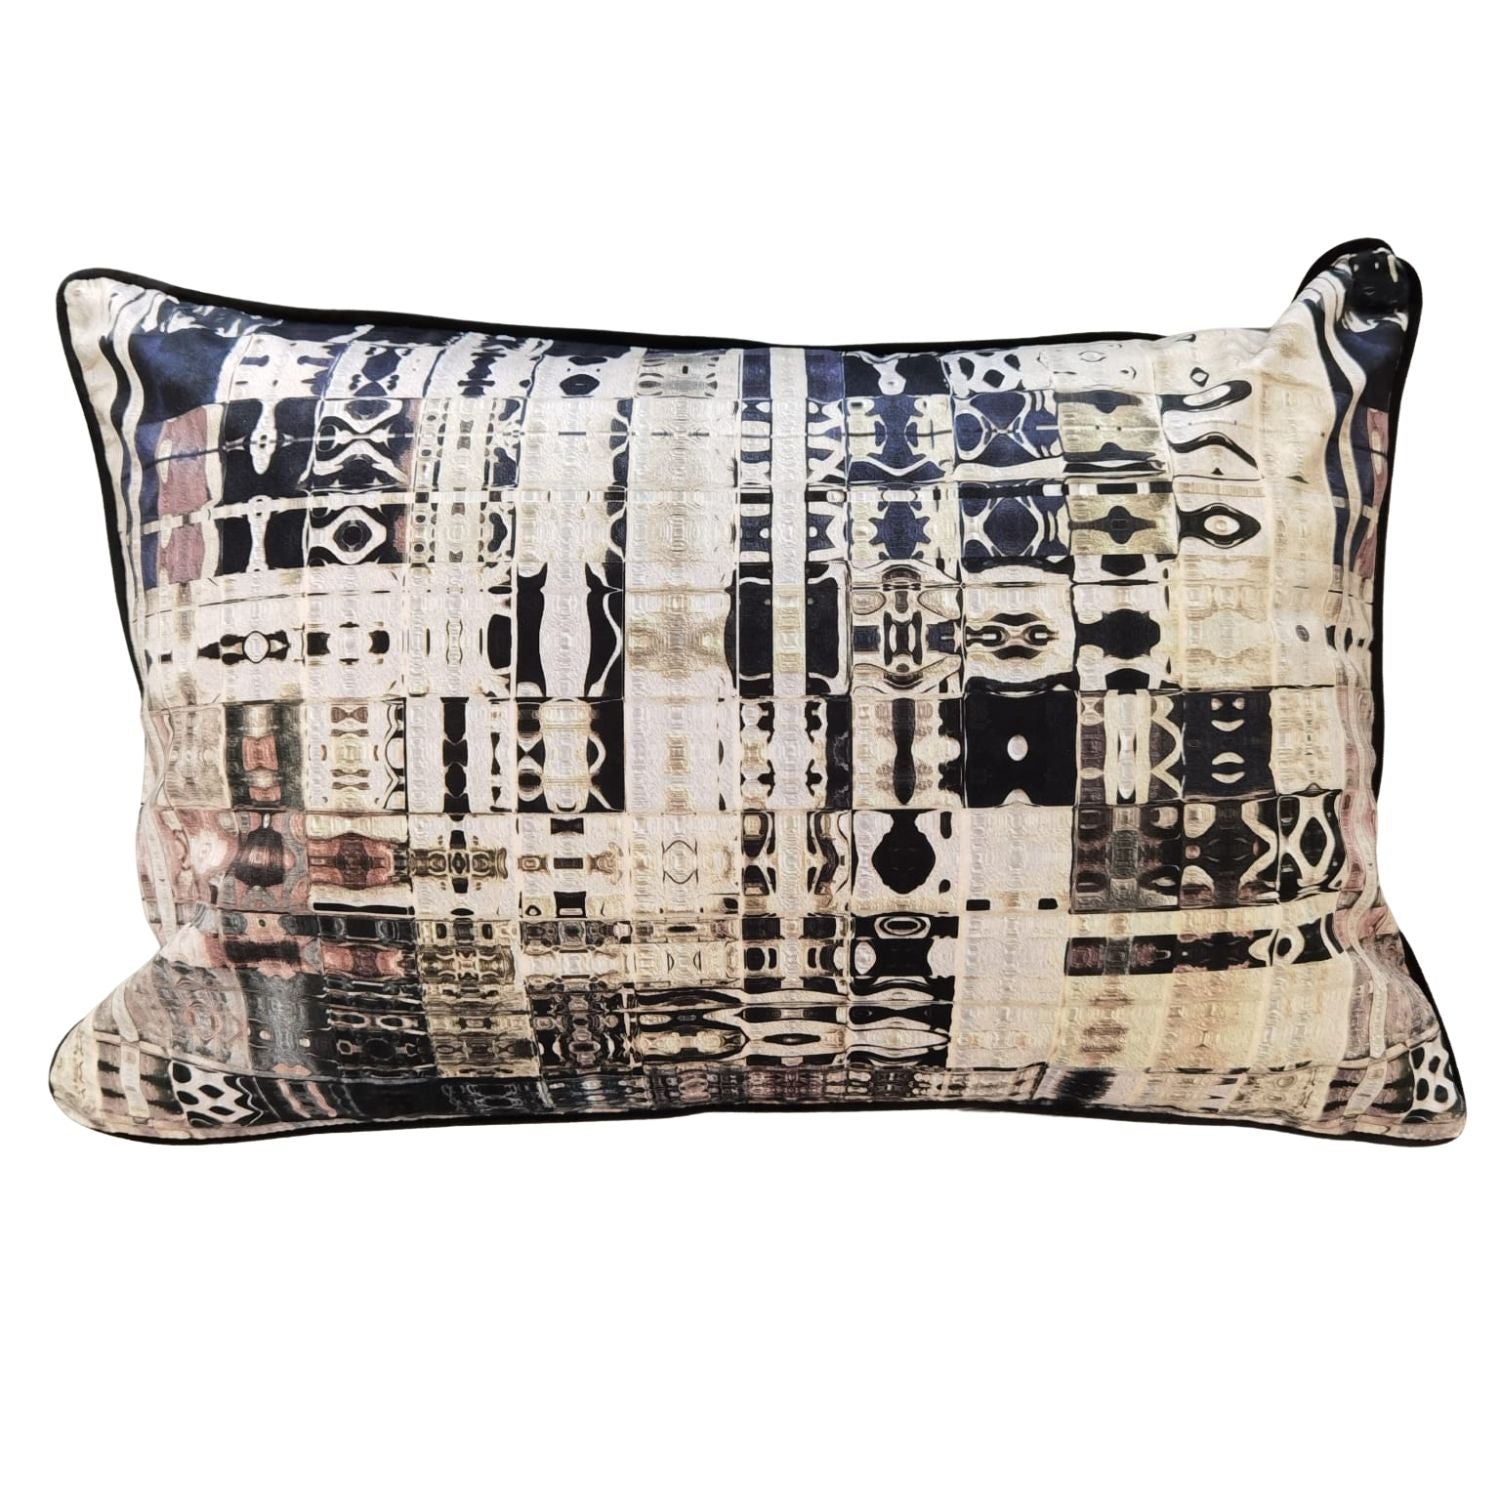 The Home Living Room Printed Piped Cushion - Light &amp; Dark 1 Shaws Department Stores